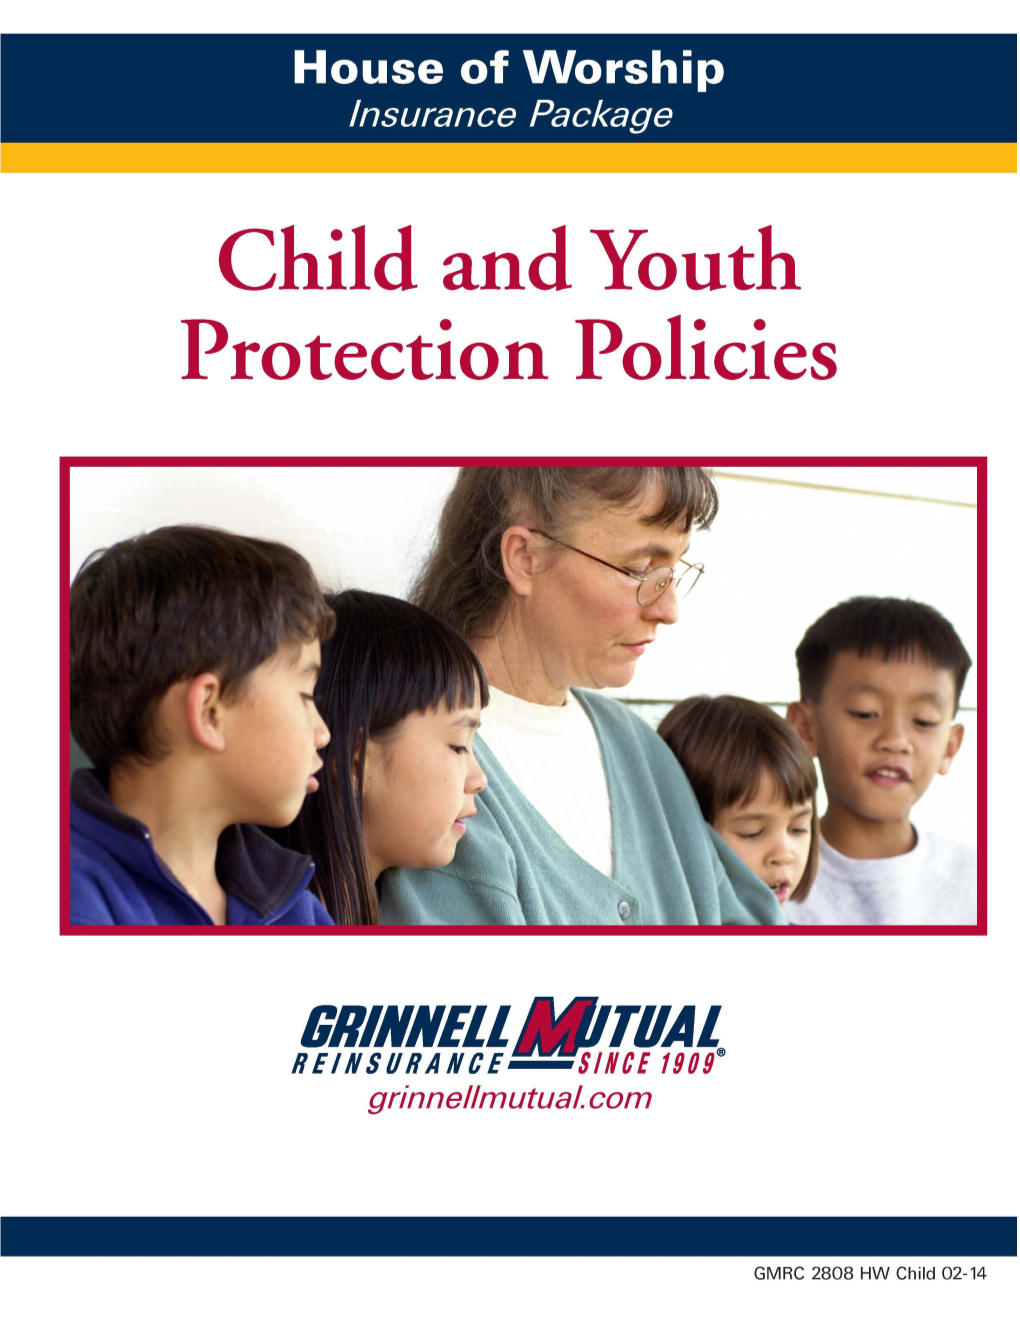 Child/Youth Protection Policies